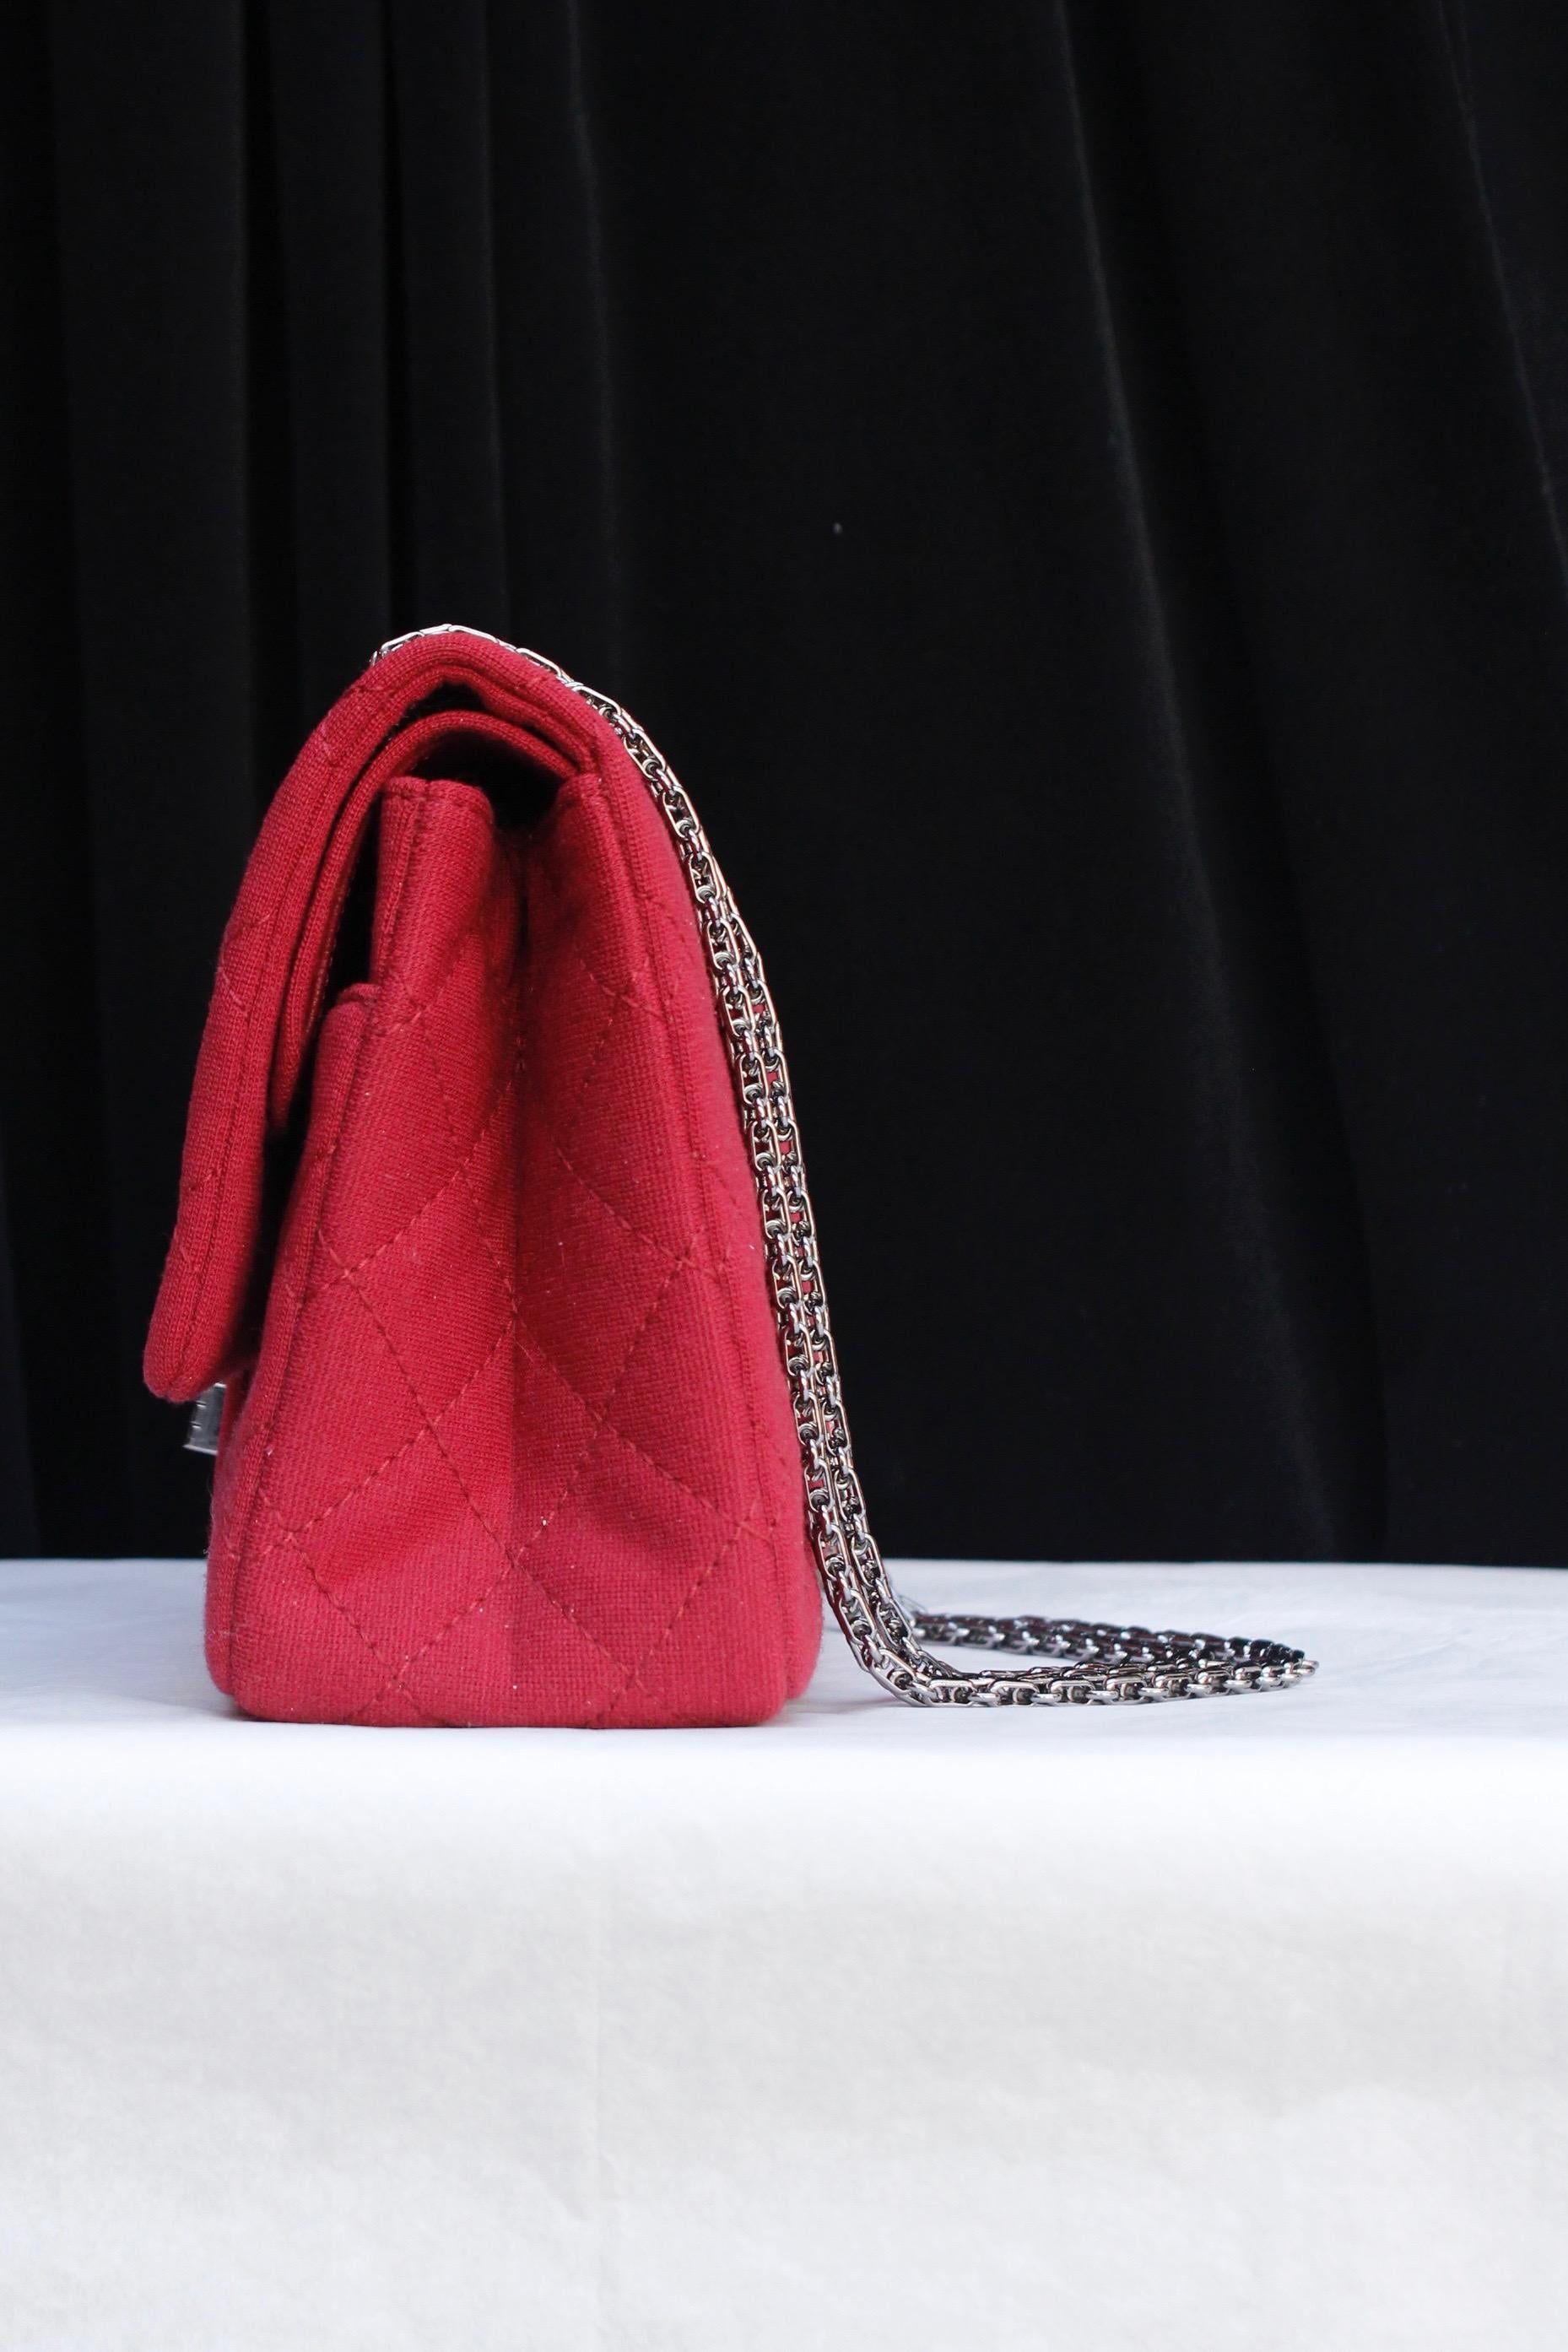 Chanel quilted red jersey 2.55 bag with silver plated chain handle For Sale 1